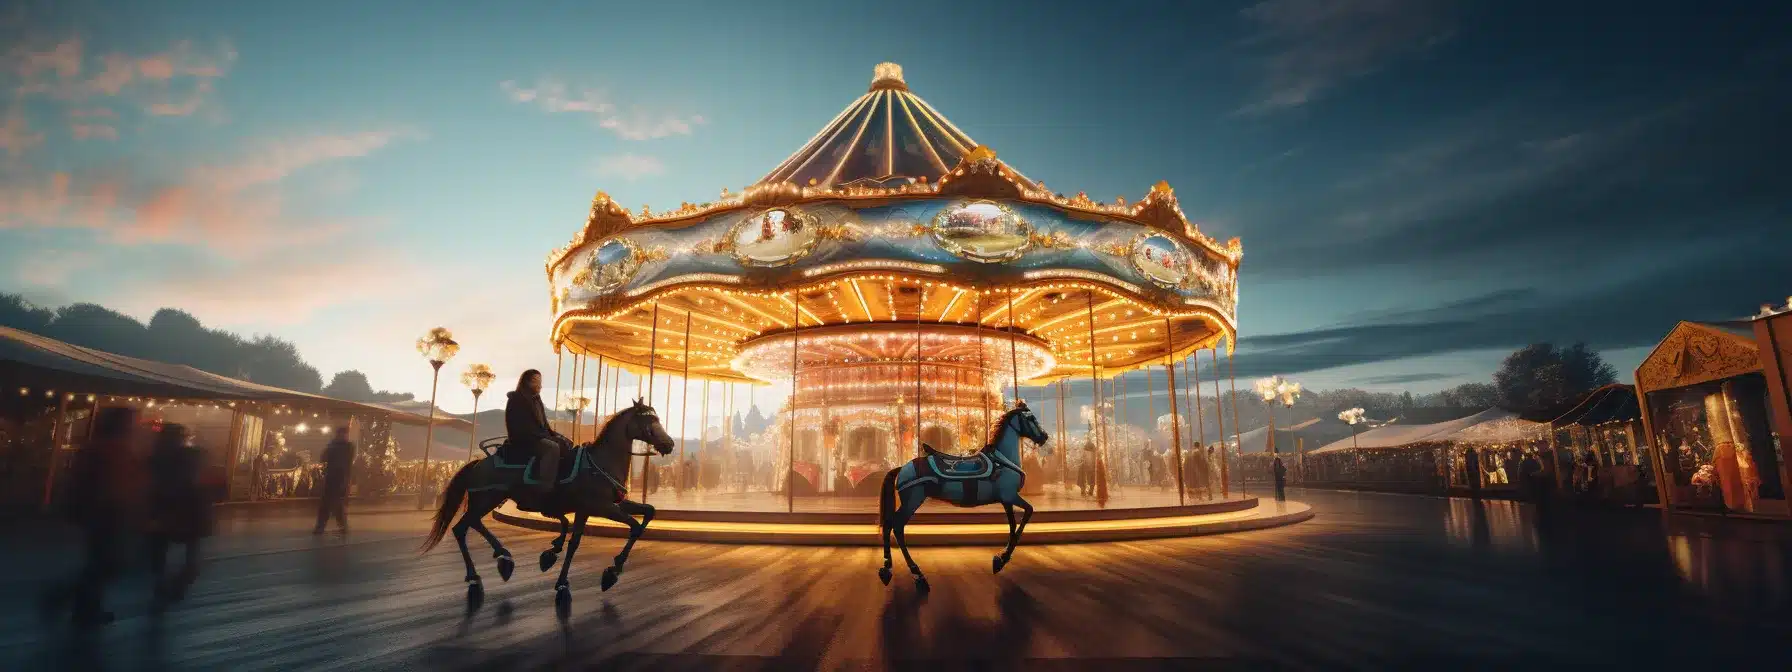 A Road Trip Adventure With A Grand Carousel Representing The Customer Journey And A Wizard Weaving Spells Of Personalization.